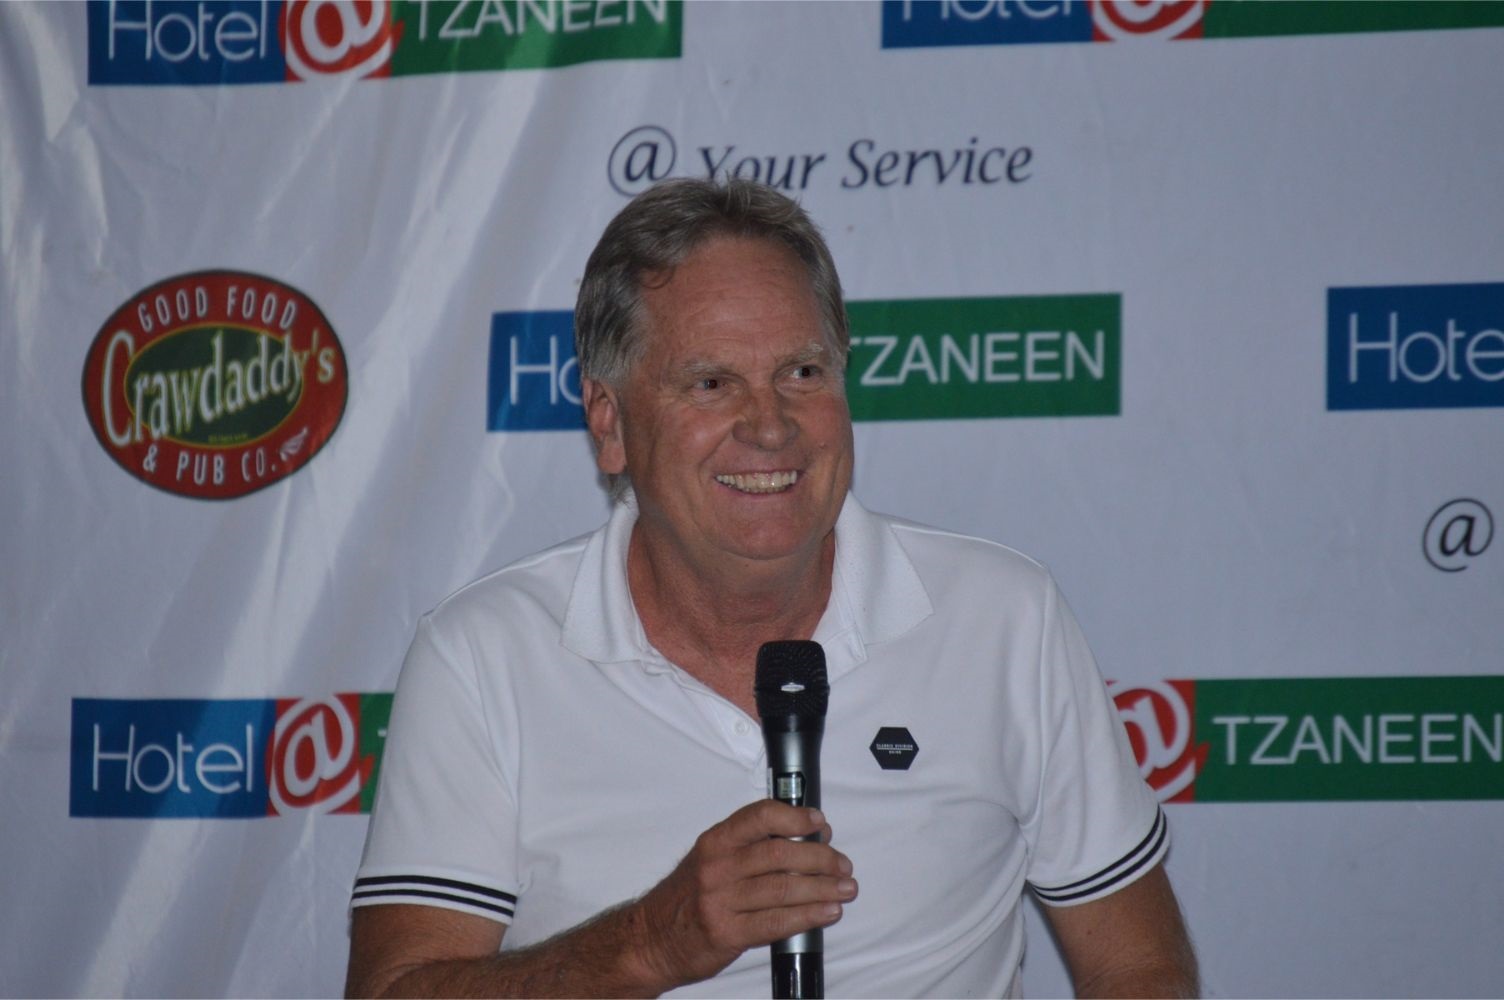 Henning-Gericke-holding-a-mic-speaking-at-a-tzaneen-chamber-of-commerce-event-at-hotel@tzaneen-in-tzaneen